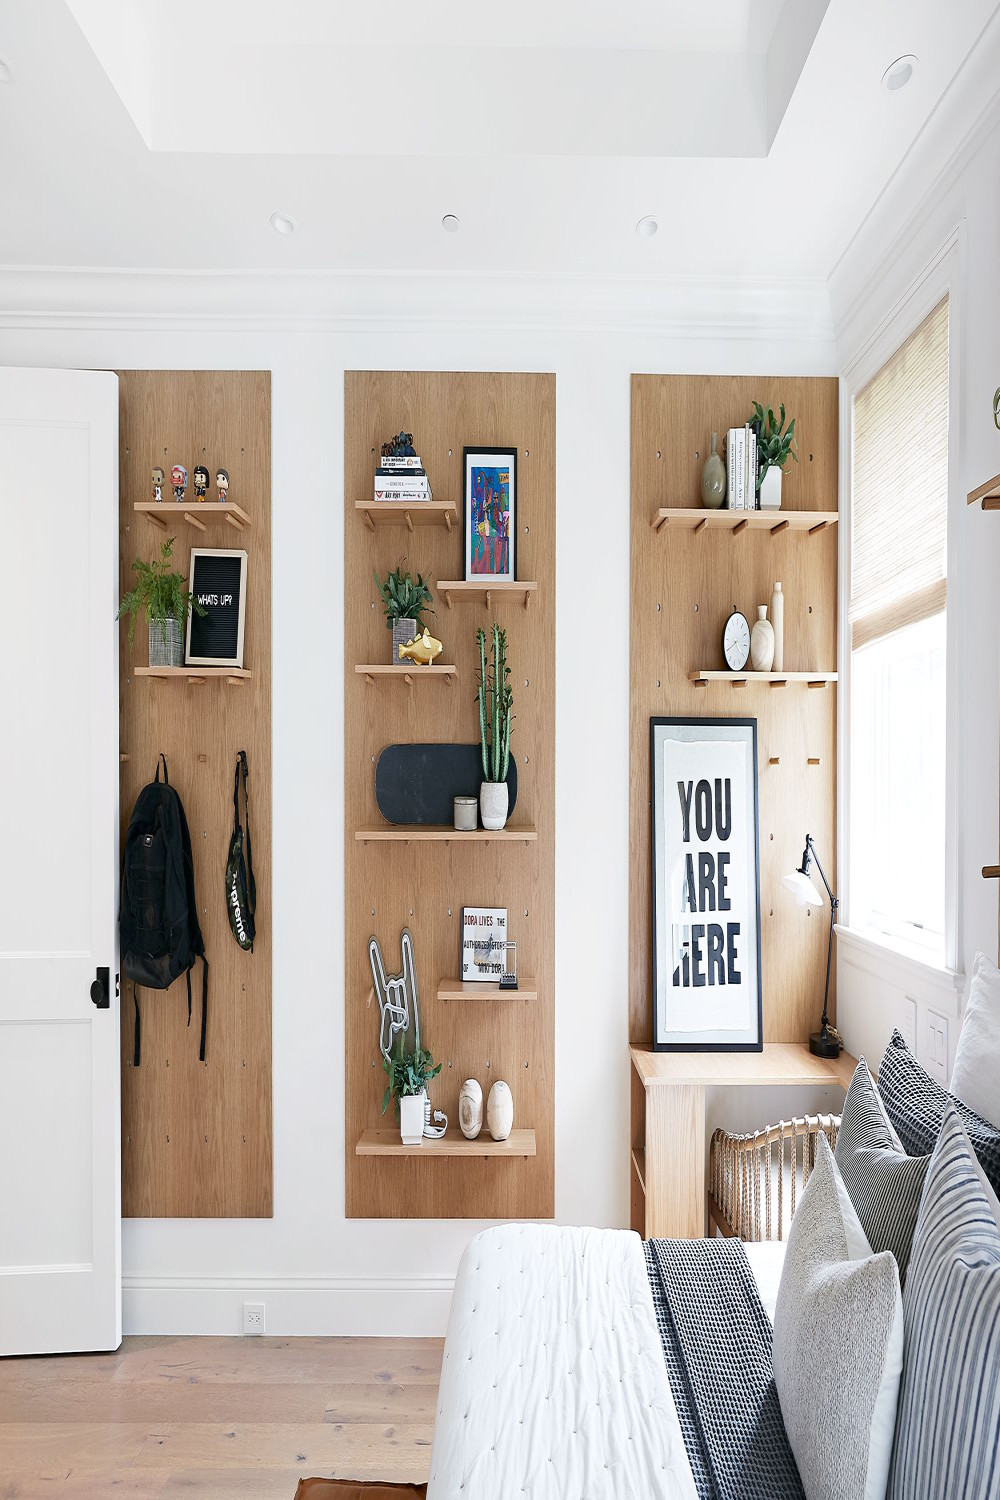 Best Bedroom Shelving Ideas to Try